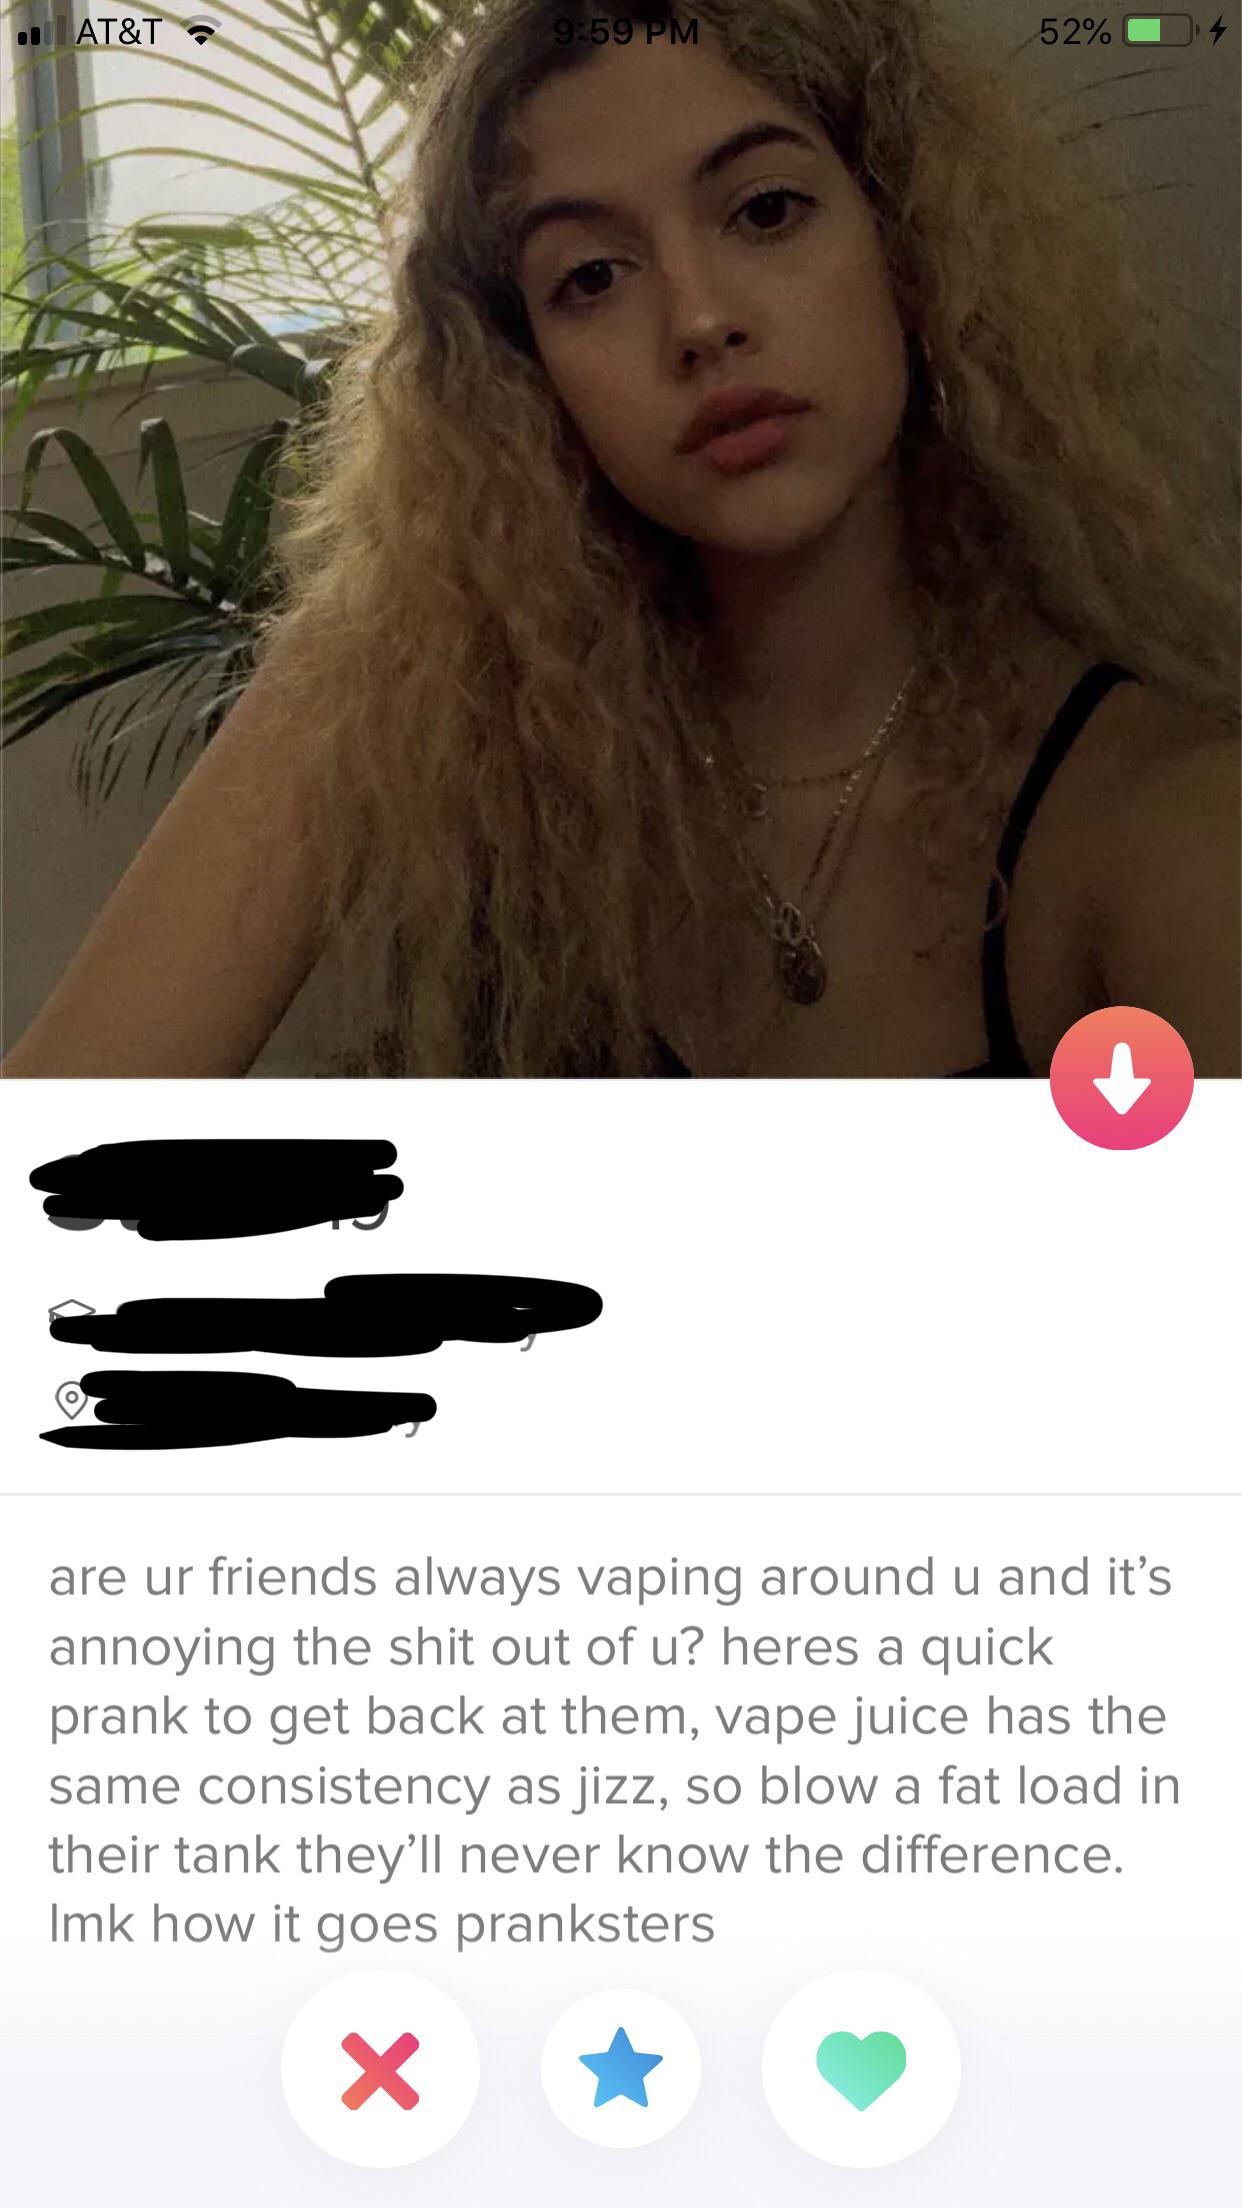 tinder wins and fails -are ur friends always vaping around u and it's annoying the shit out of u? heres a quick prank to get back at them, vape juice has the same consistency as jizz, so blow a fat load in their tank they'll never know the difference.